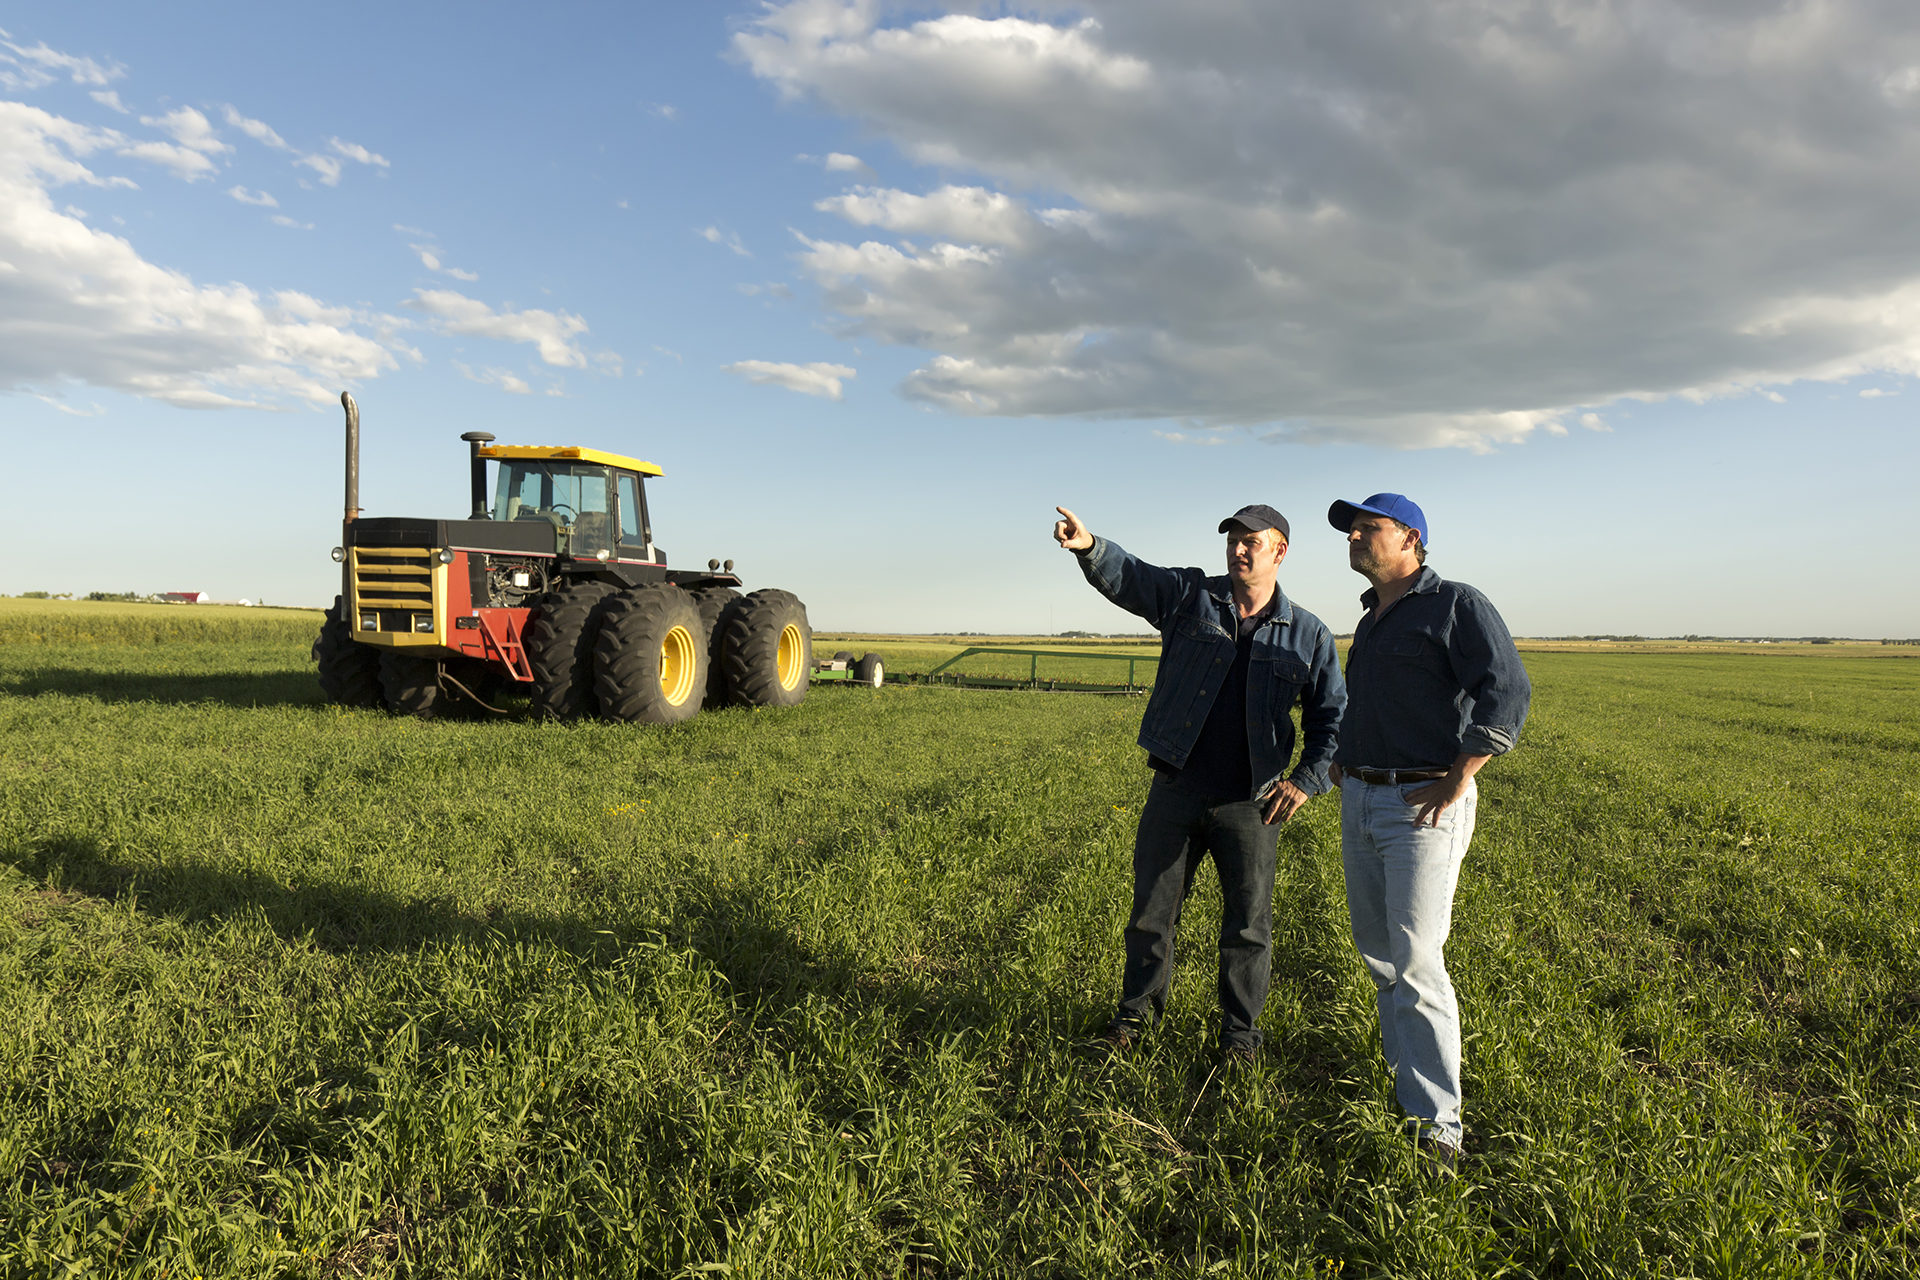 Two farmers in conversation in a field in front of a tractor.